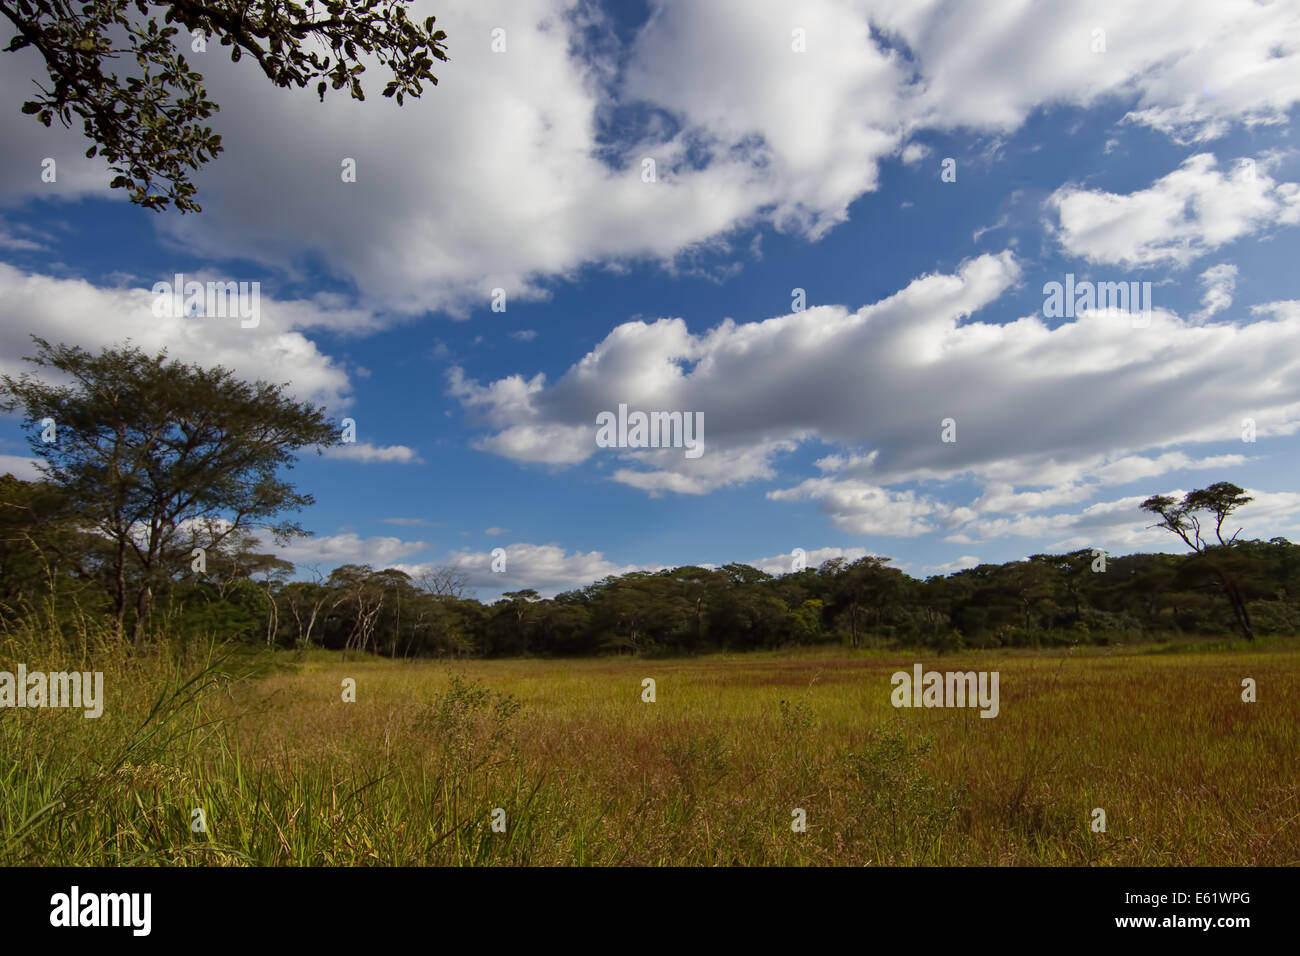 Miombo woodlands cover huge tracts of land near Bangweulu, Zambia and house many magnificent trees. Stock Photo